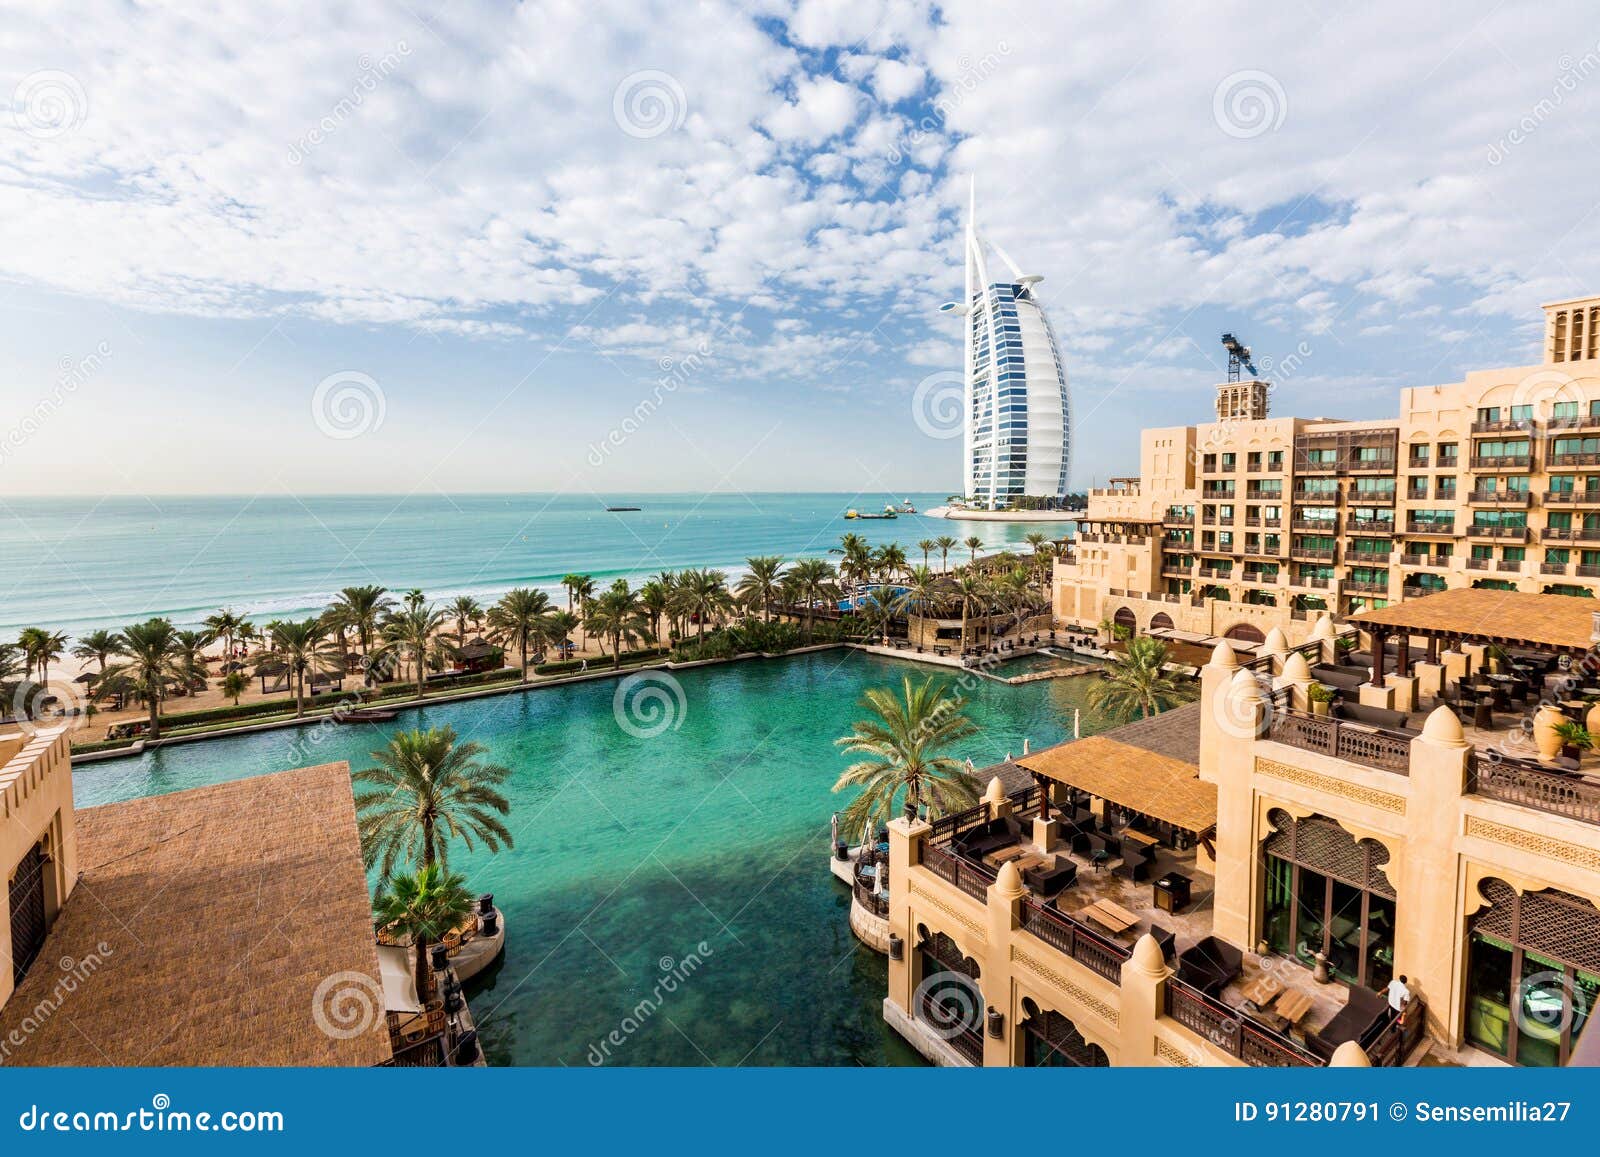 view from the hotel window of jumeirah mina a`salam